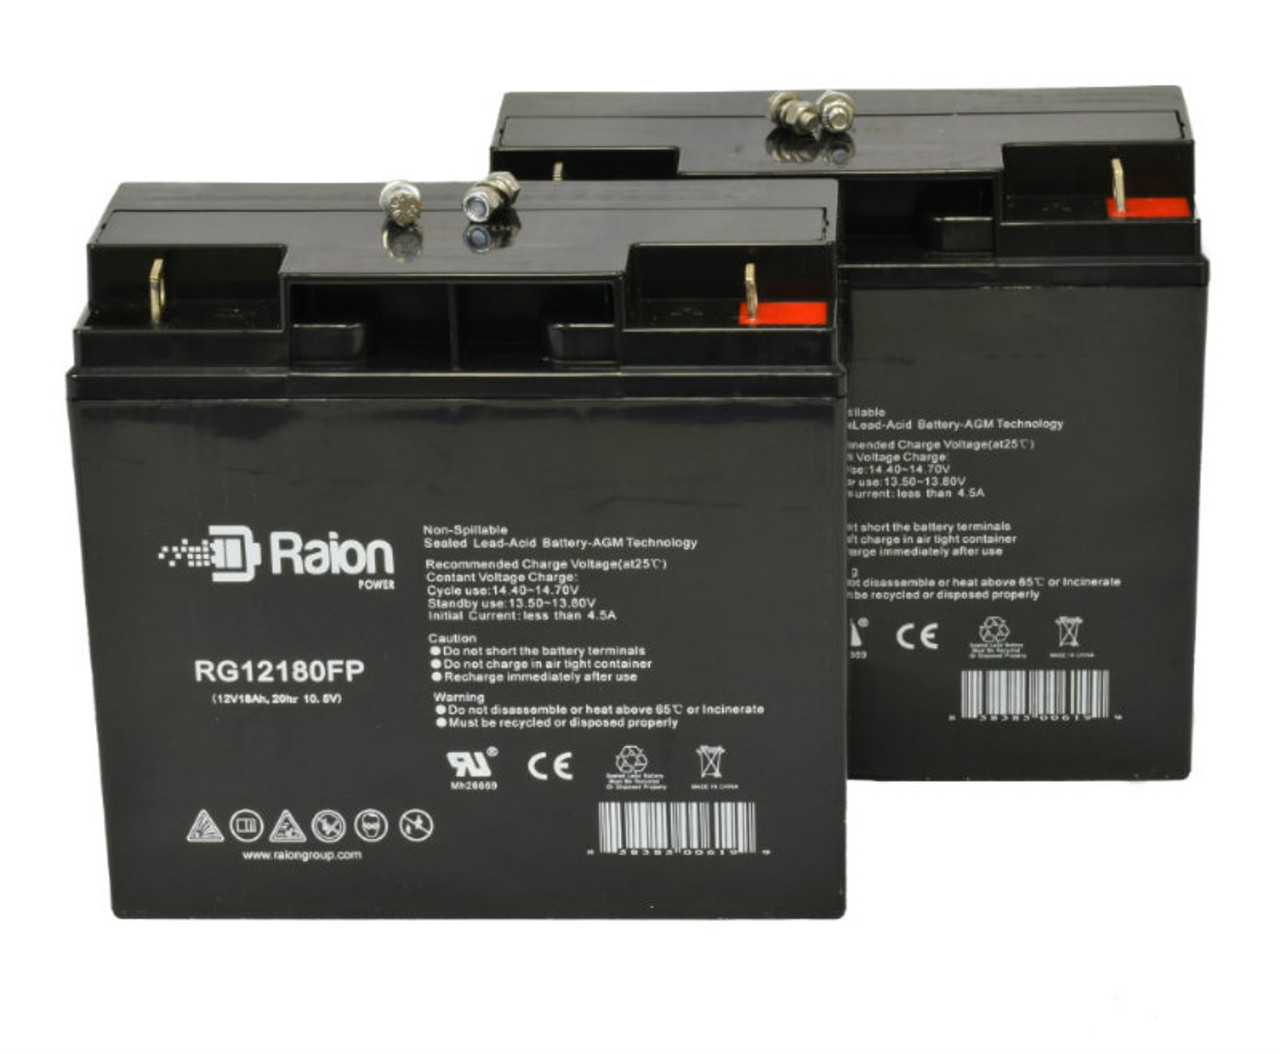 Raion Power Replacement RG12180FP 12V 18Ah Emergency Light Battery for Big Beam 2IQ12S15 - 2 Pack